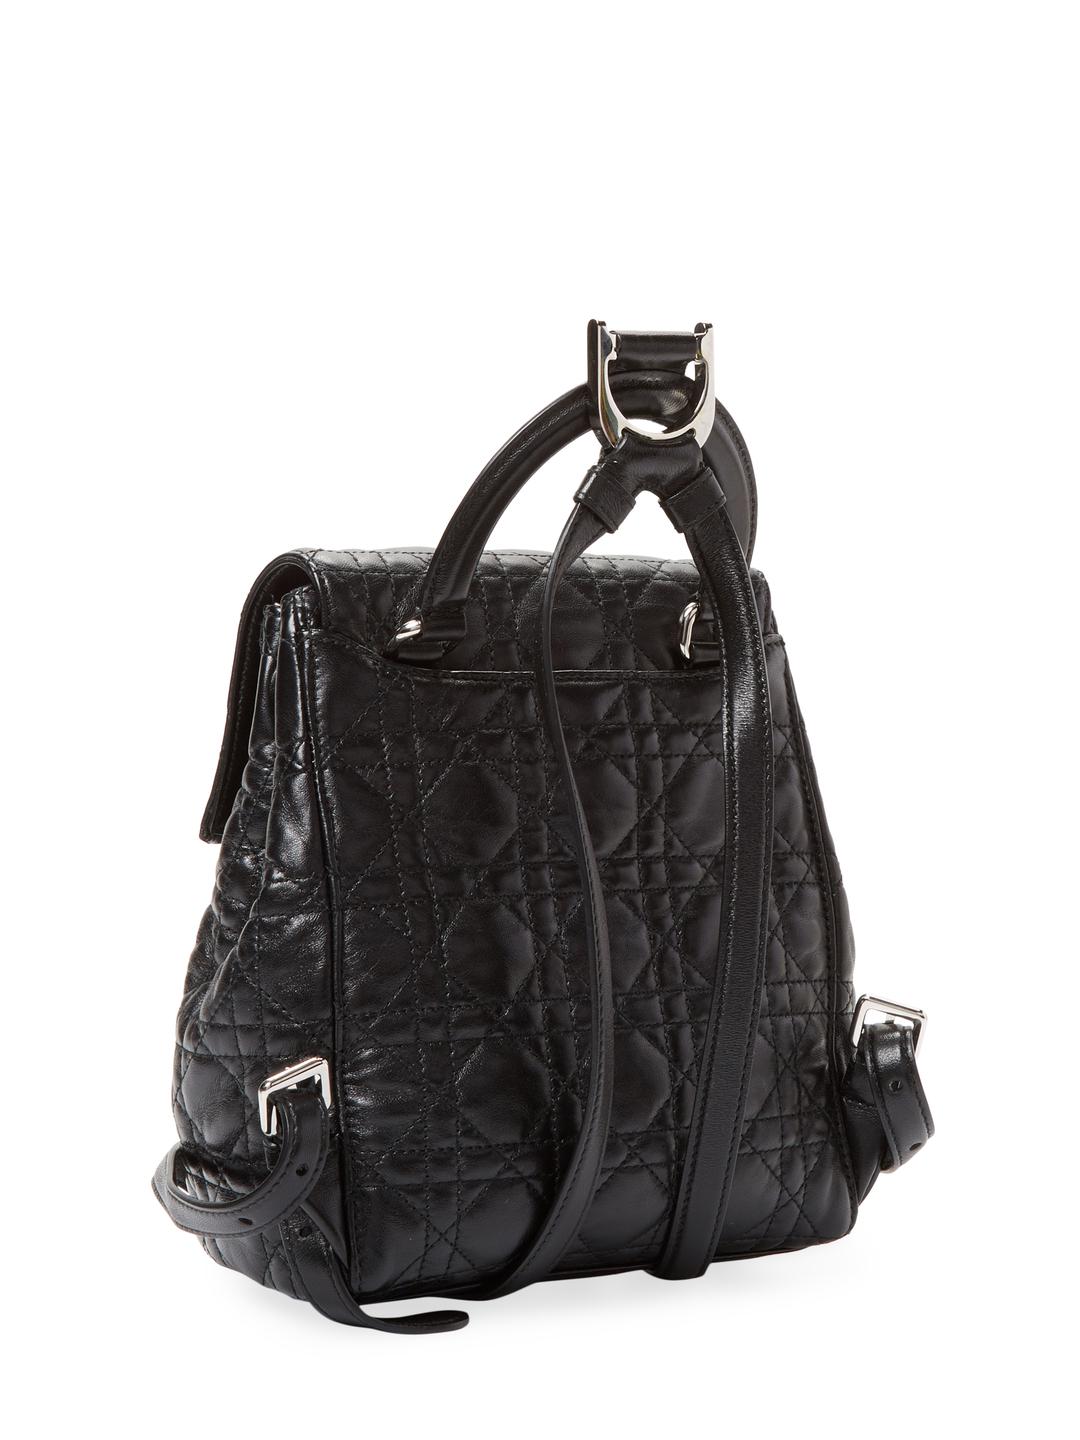 Dior Quilted Leather Backpack in Black - Lyst